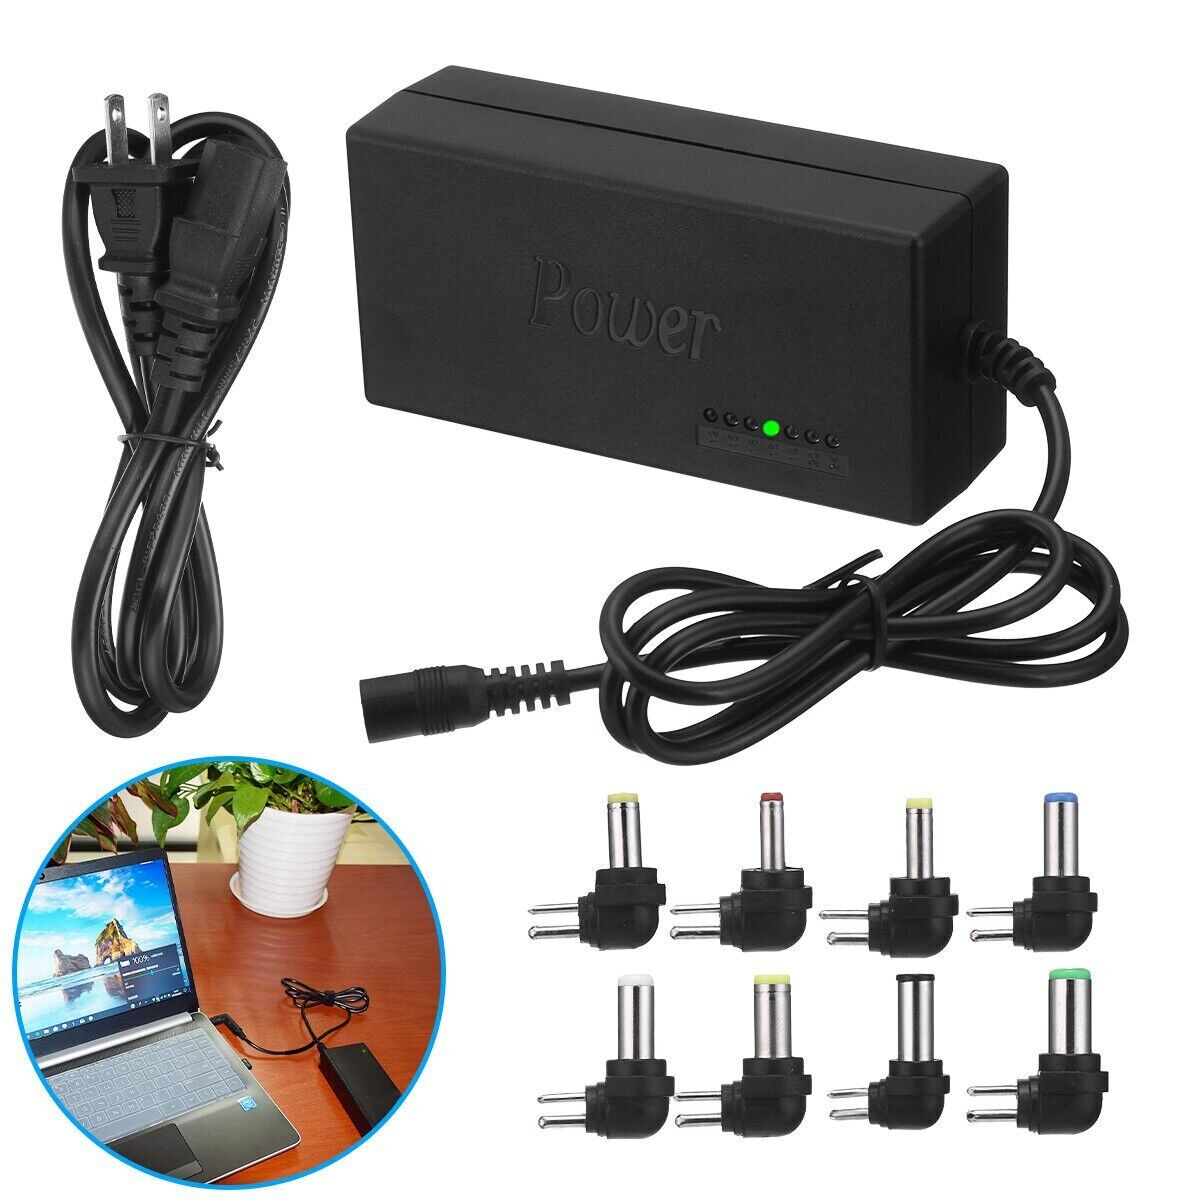 8/34 Tips 96W Universal Power Supply Charger for Laptop & Notebook AC/DC Power